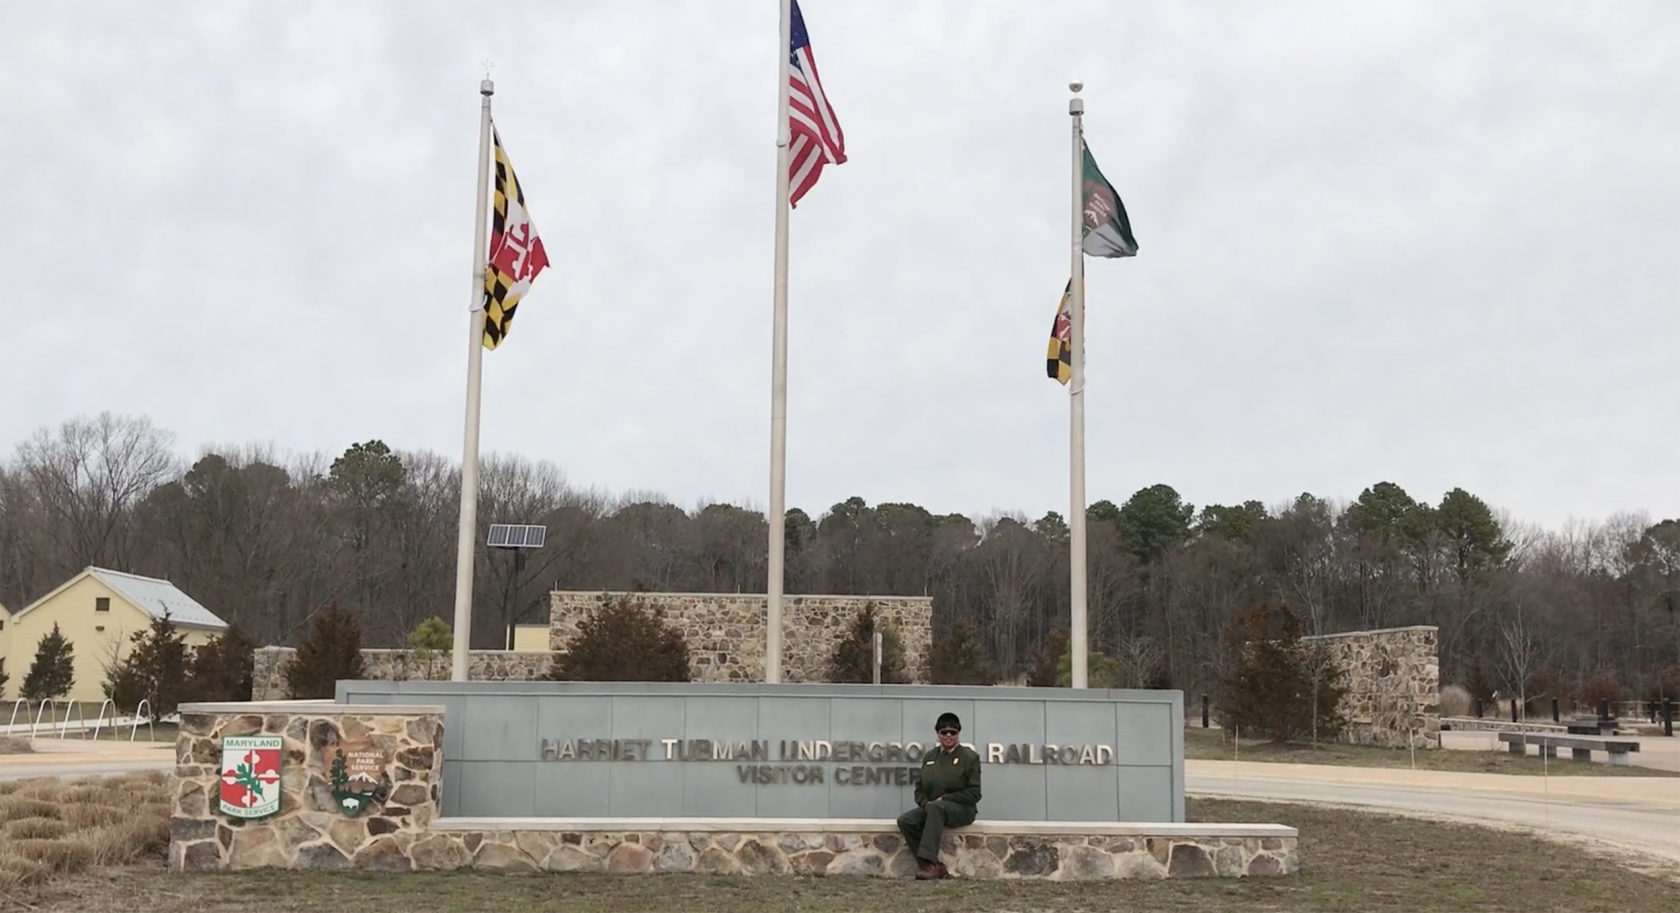 Deanna Mitchell sits outside on a stone sign for the Visitor Center at Harriet Tubman Underground Railroad National Historical Park. Three flags wave gently on flagpoles behind the sign.